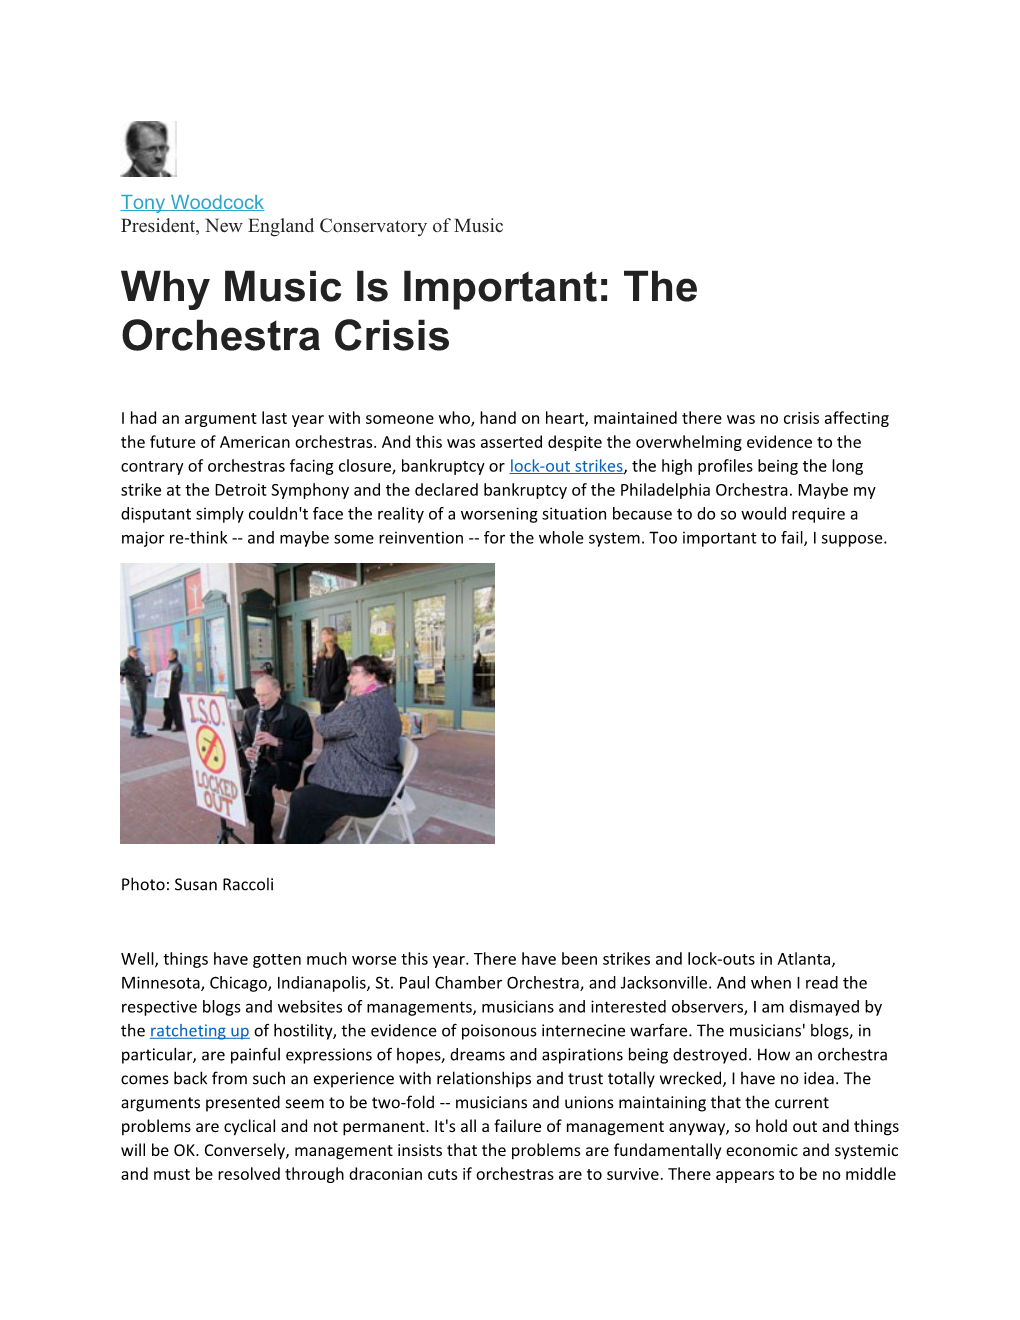 Why Music Is Important: the Orchestra Crisis